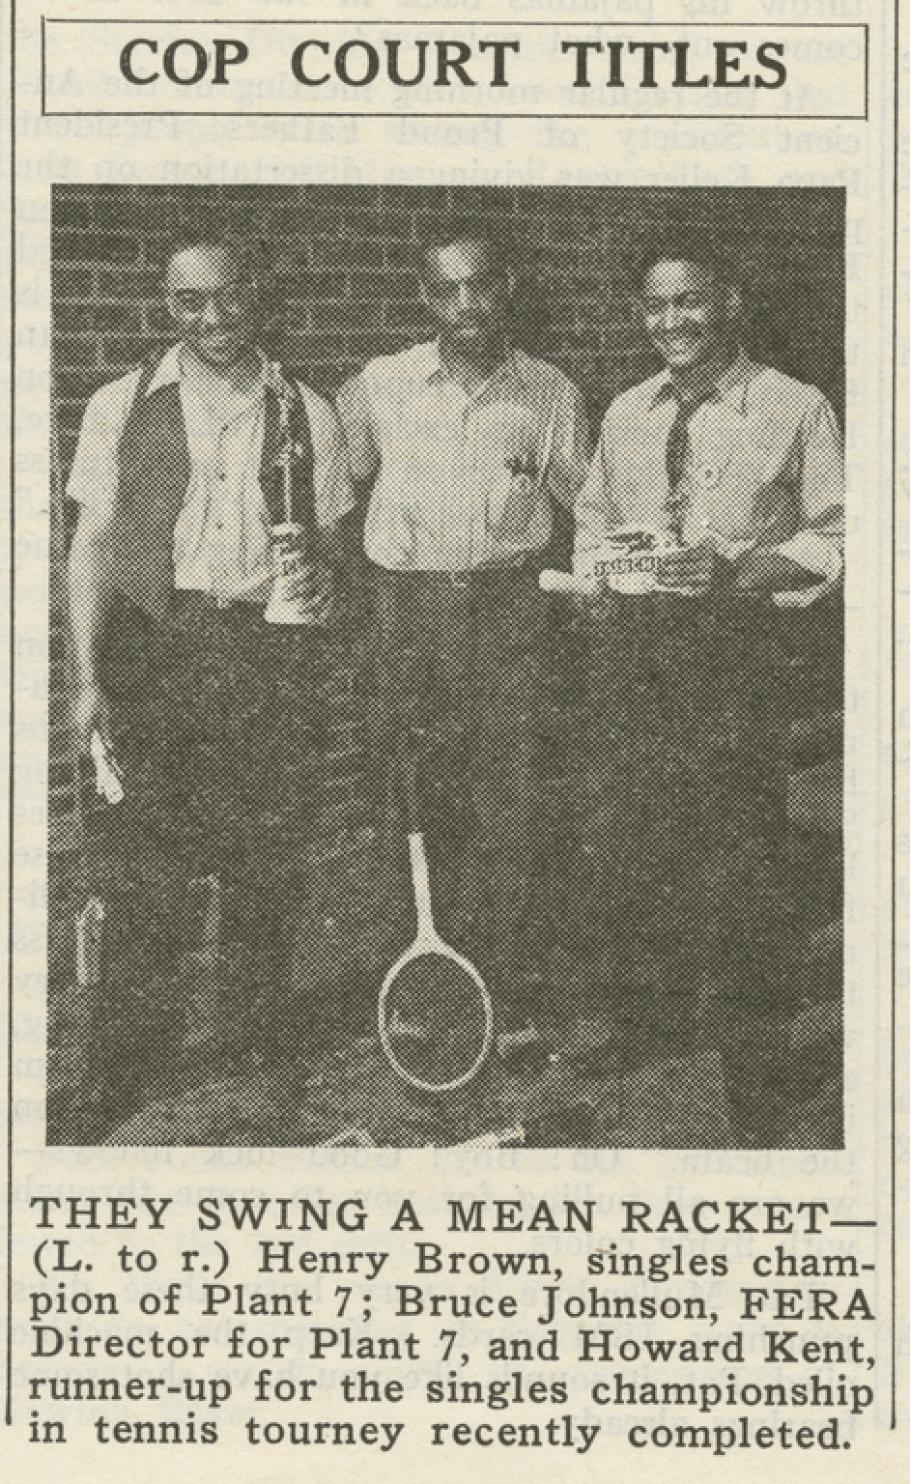 Halftone photo of three Black men.  The one on the left holds a trophy, the one in the middle a tennis racket, and the one on the right holds the Fairchild logo.